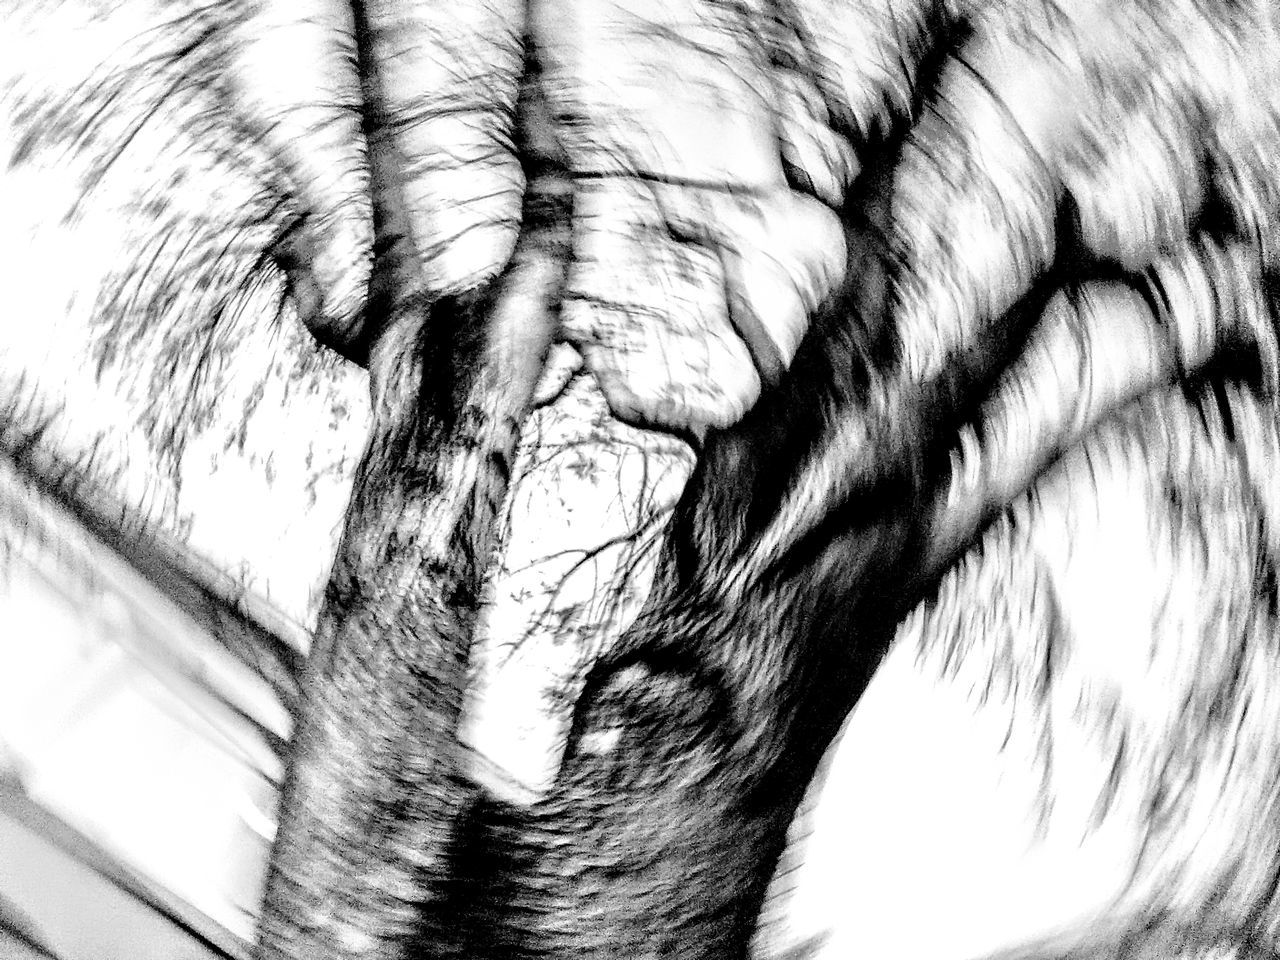 drawing, black and white, sketch, monochrome photography, monochrome, tree, close-up, nature, no people, day, outdoors, pattern